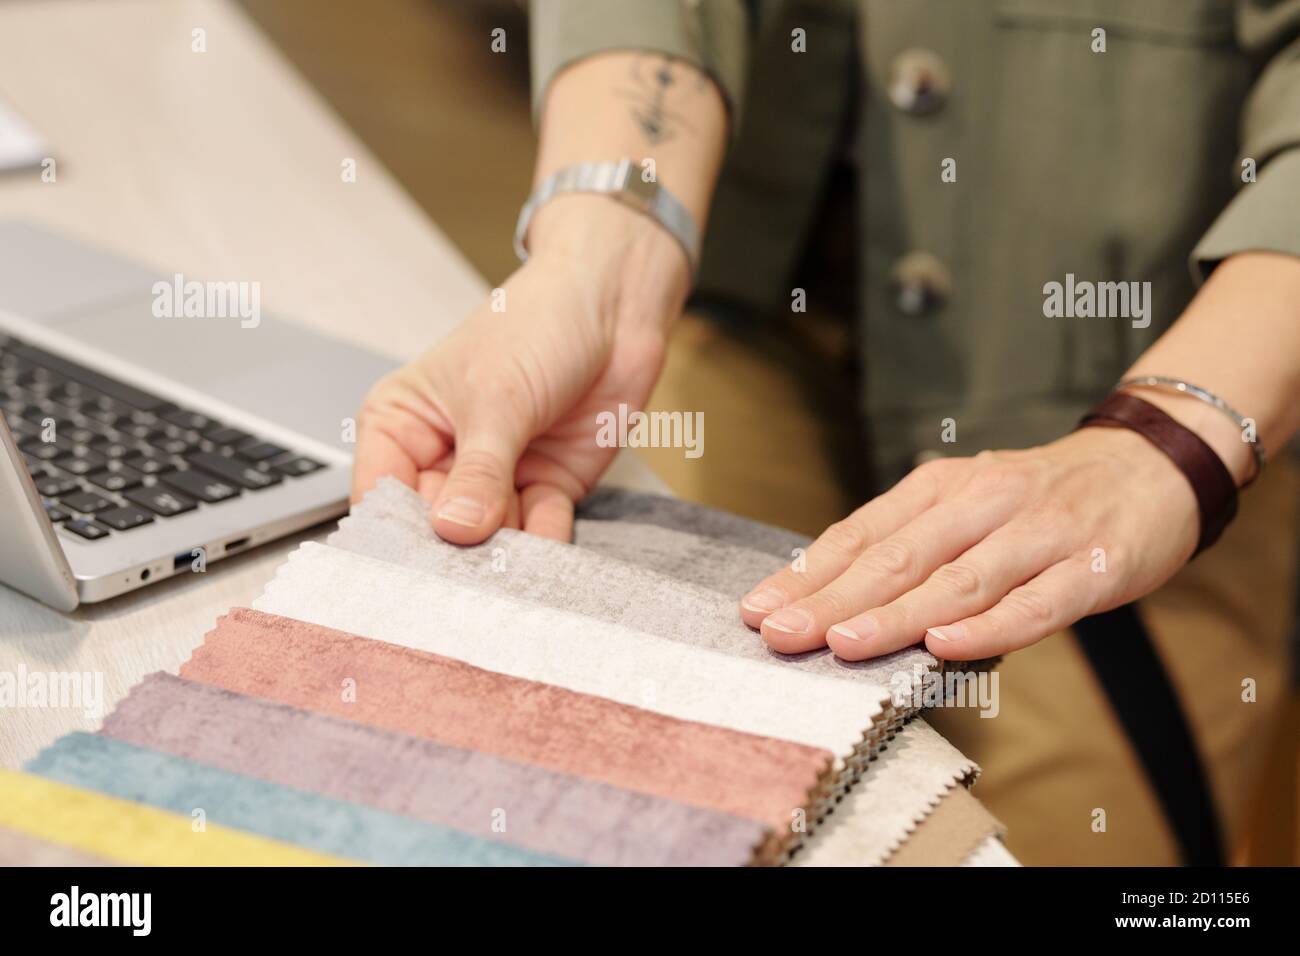 Hands of manager of studio of interior design looking through fabric samples Stock Photo